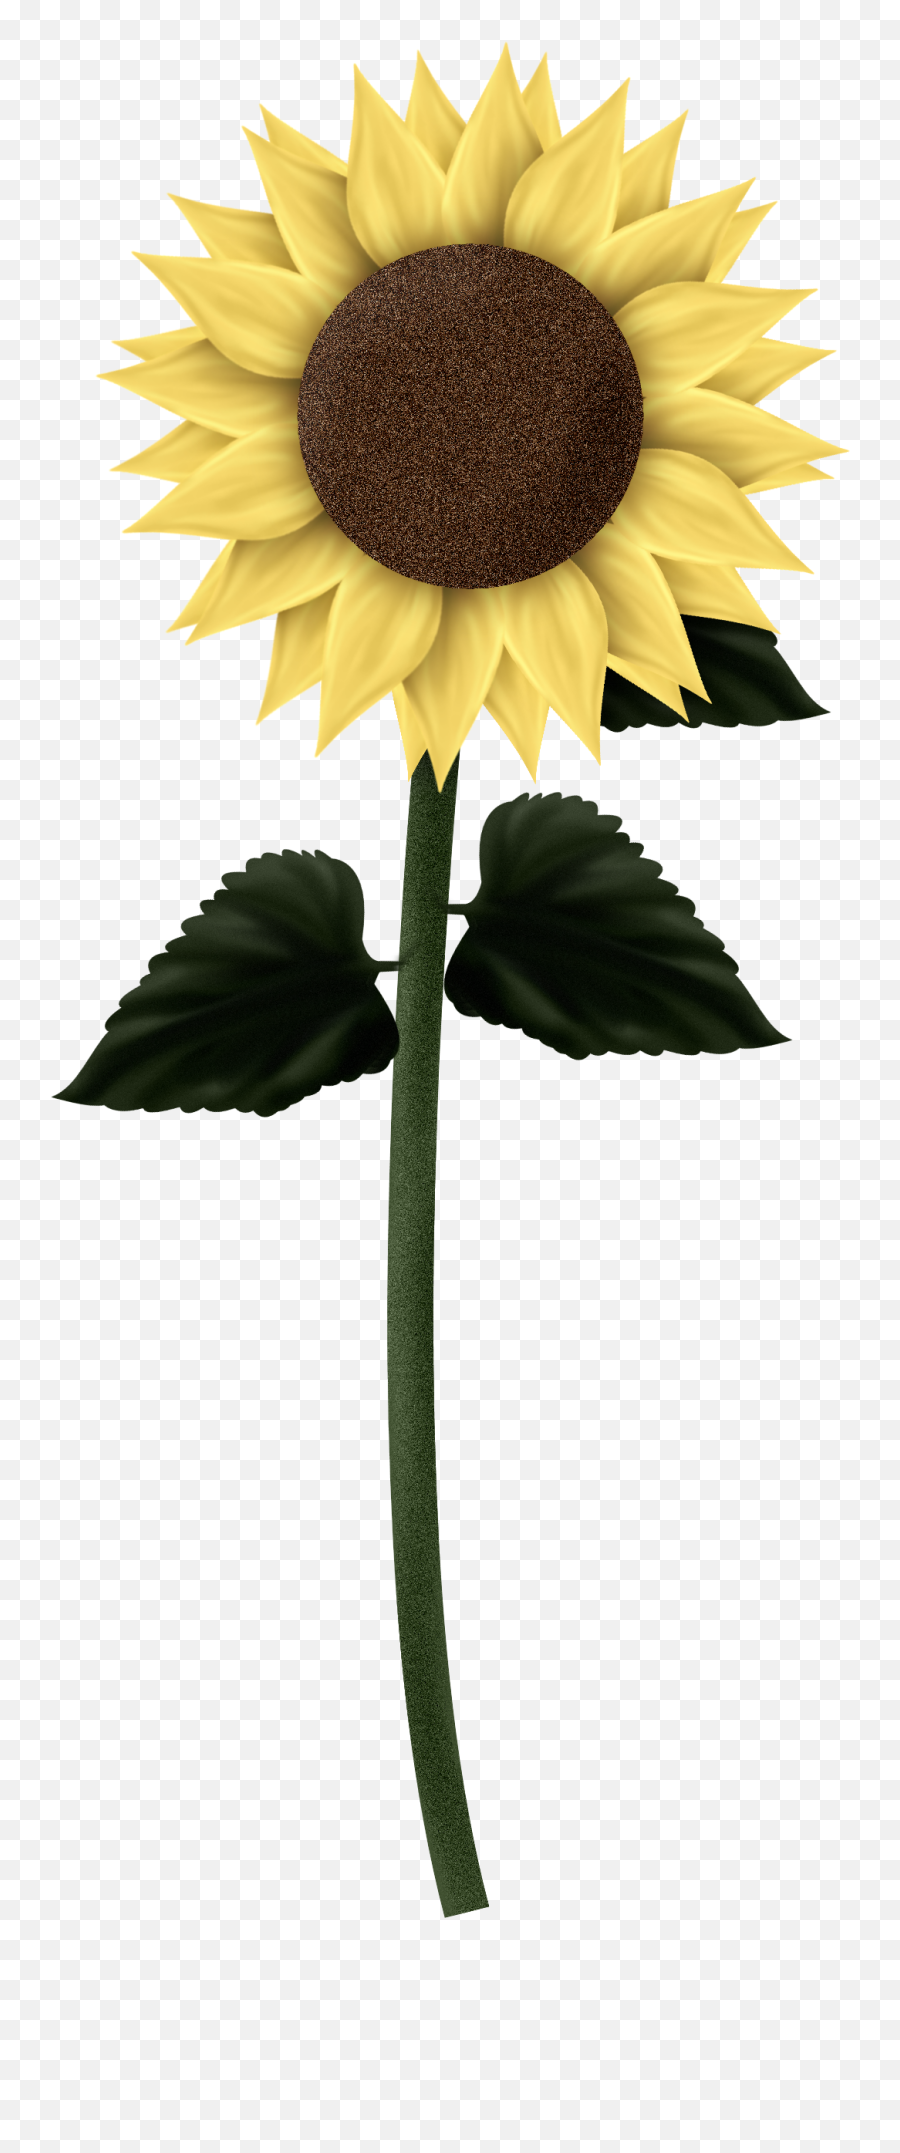 Sunflowers Png Clipart Png All - Tall Sunflower Transparent Background Emoji,Transparent Clipart